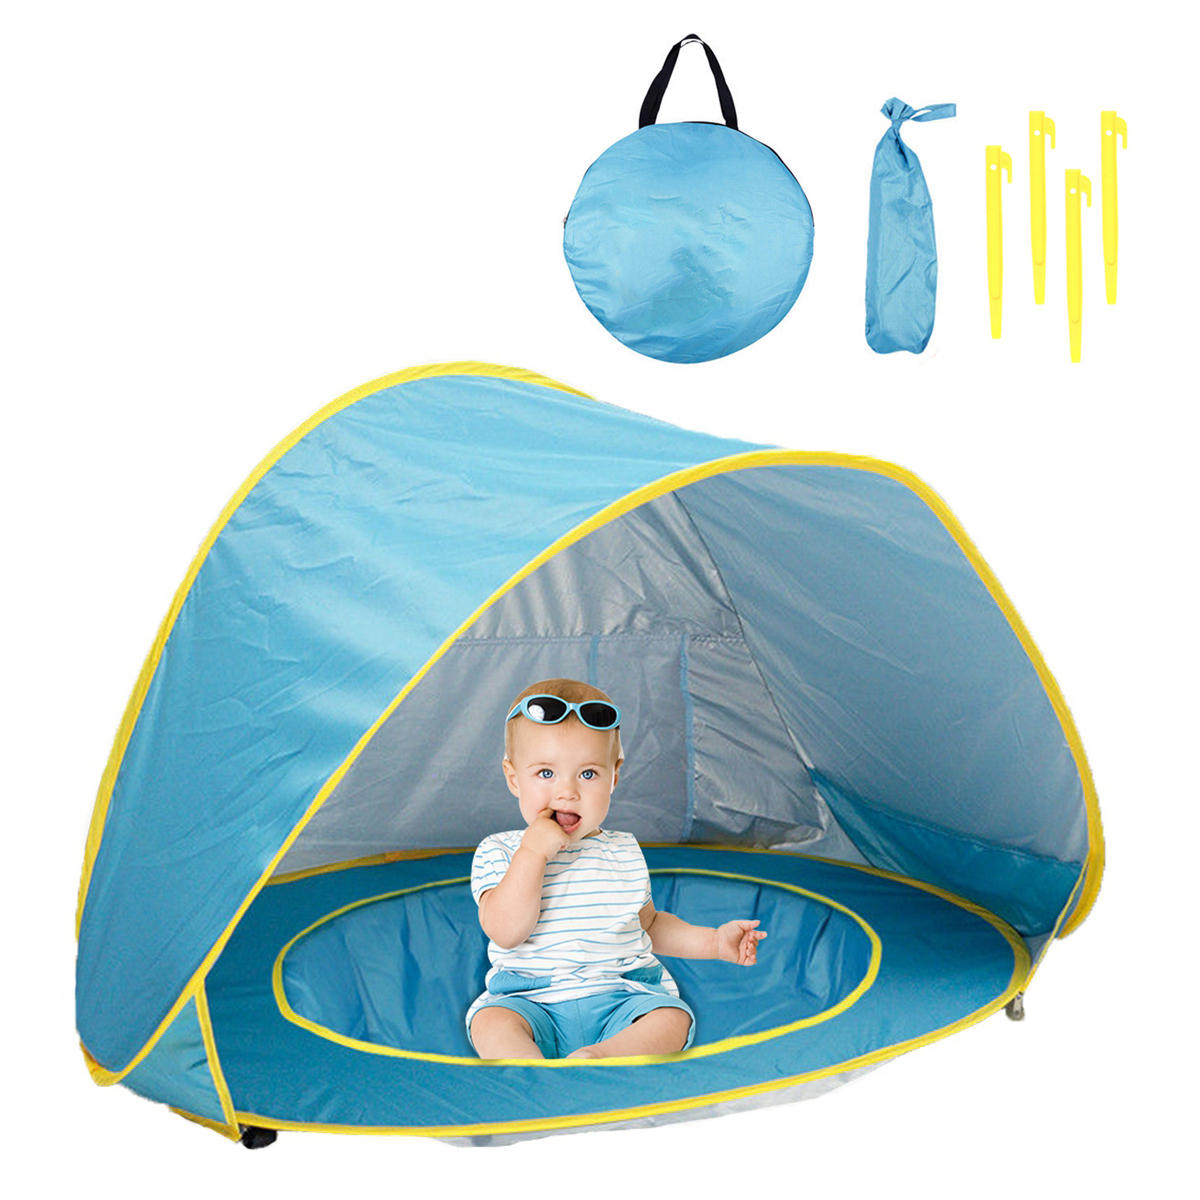 Infant Baby Pop Up Camping Beach Tent Waterproof UV Sunshade Shelter With Water Pool